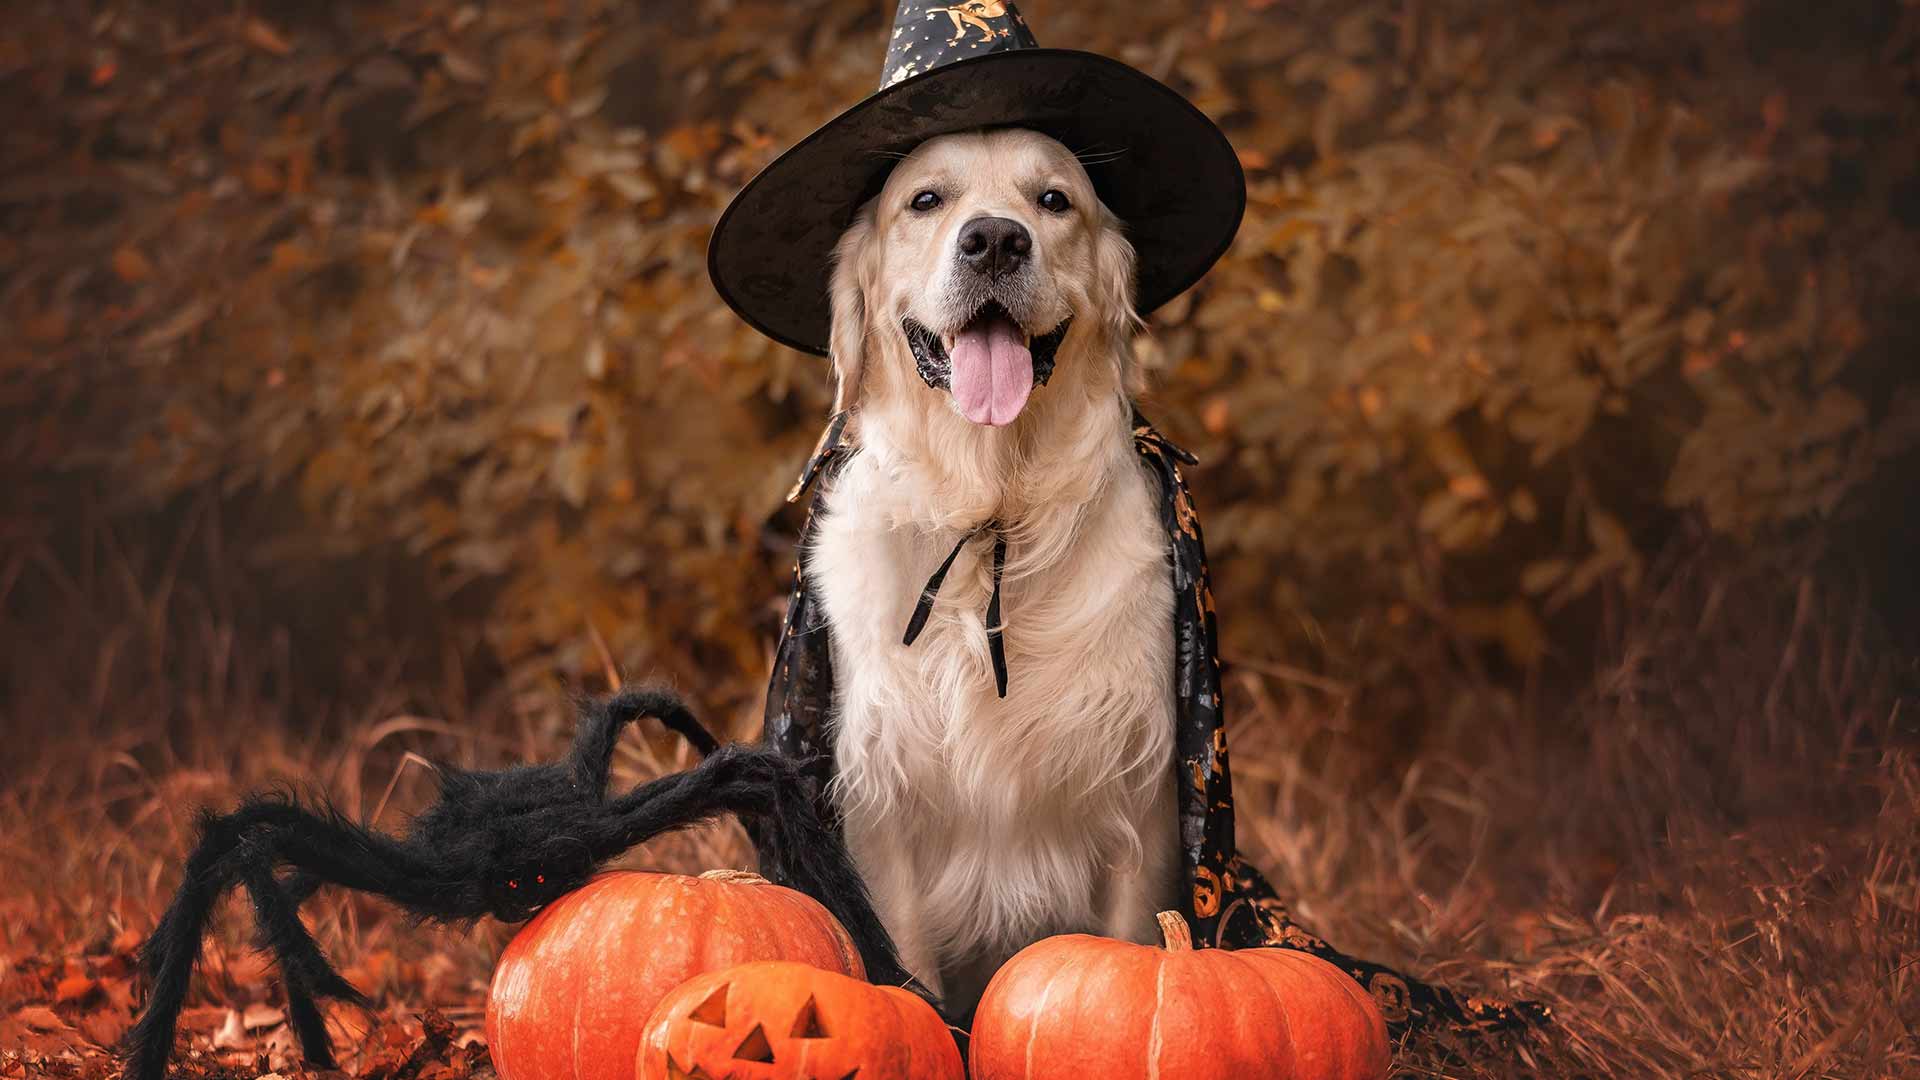 Dressed-Up Dogs: Check Out This Halloween Costume Contest for Pets, Parties + Event Photos